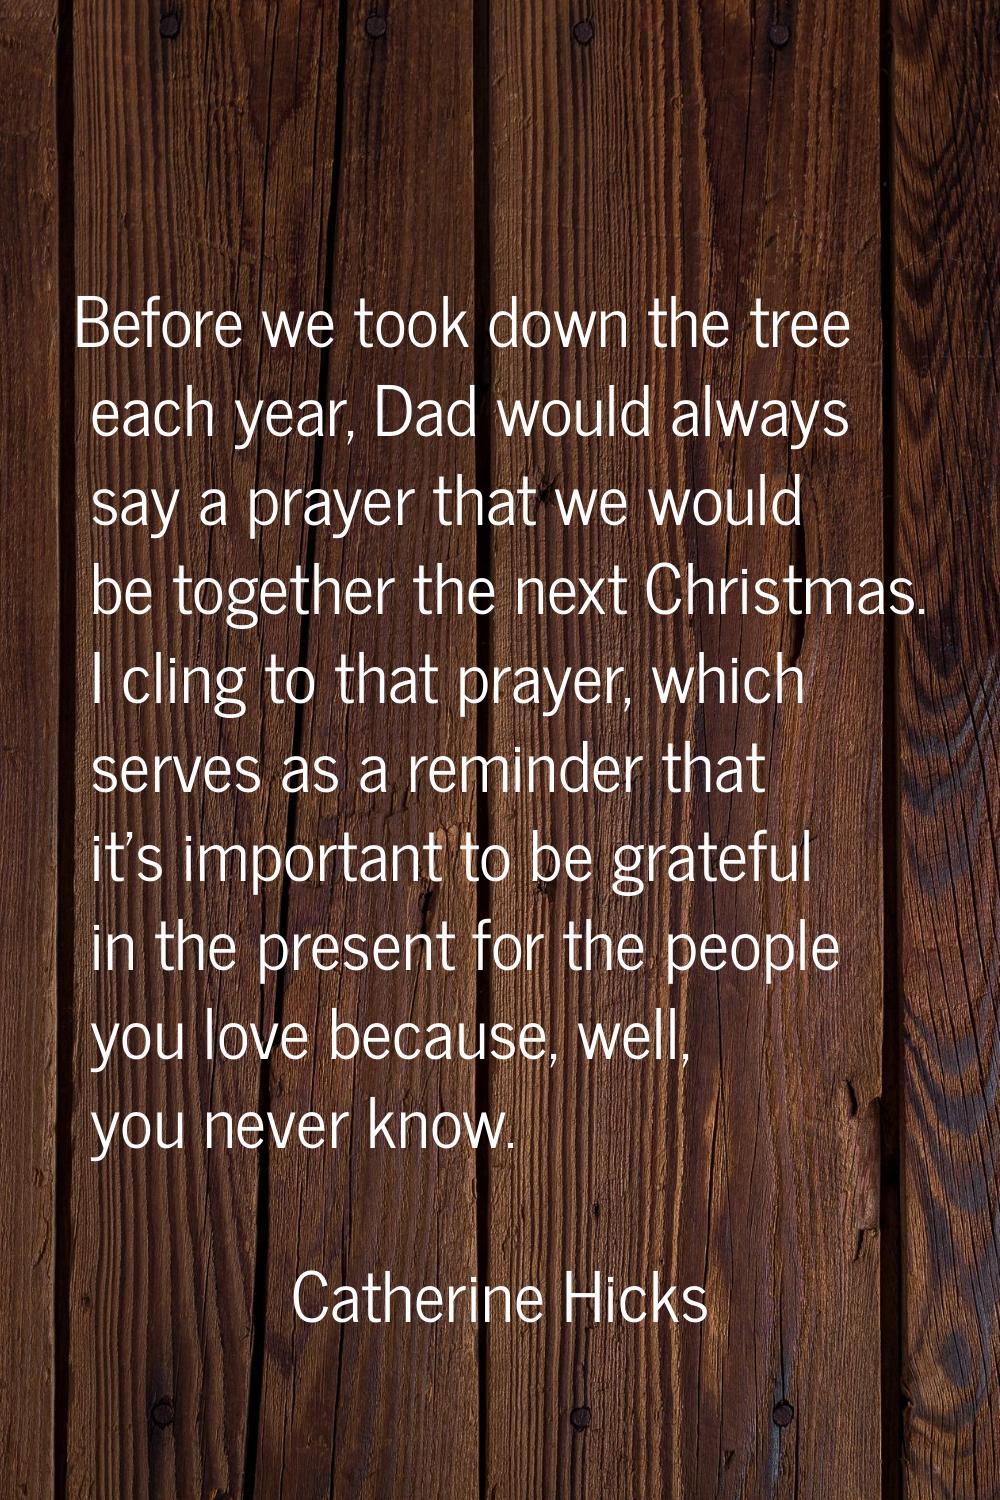 Before we took down the tree each year, Dad would always say a prayer that we would be together the